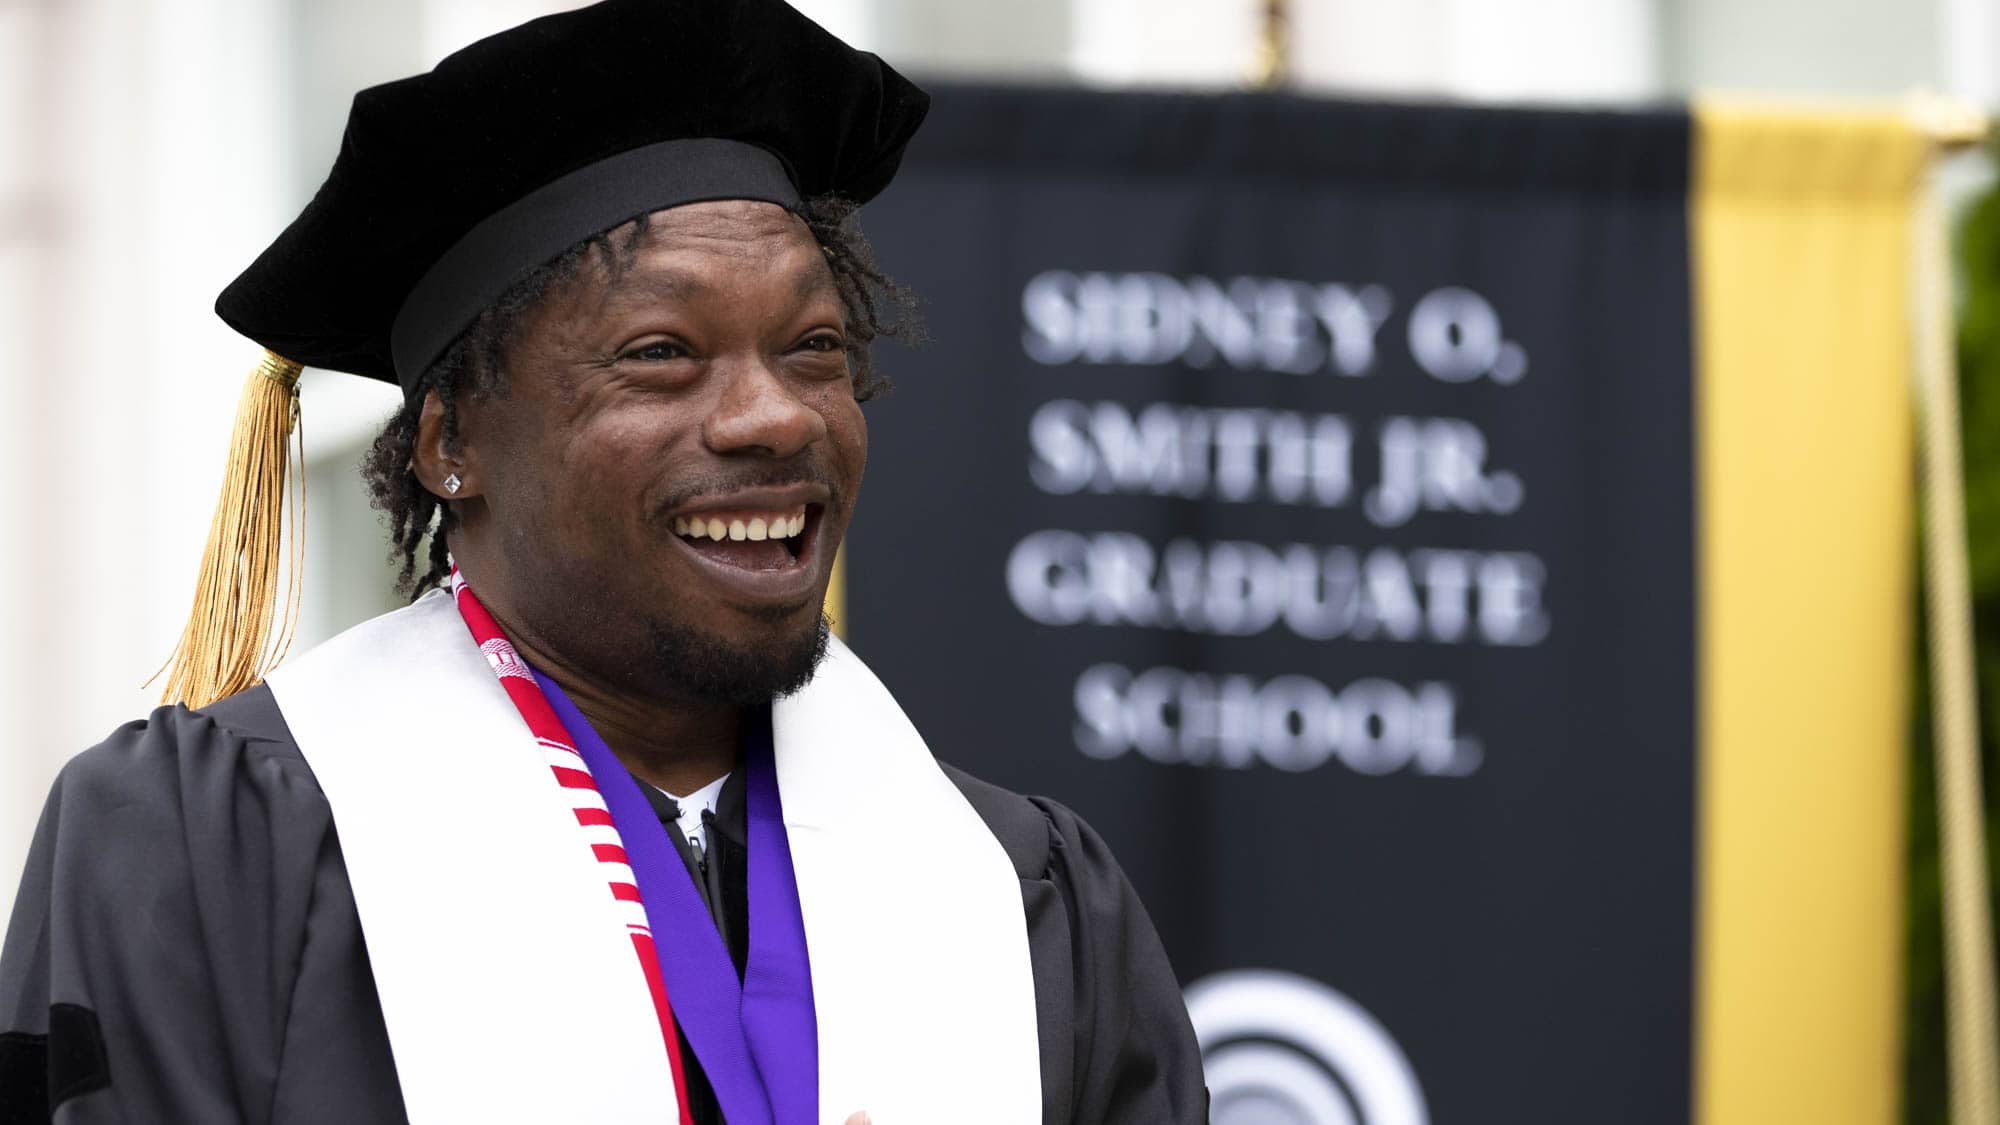 LaDonnis Perry walks across the stage at graduation